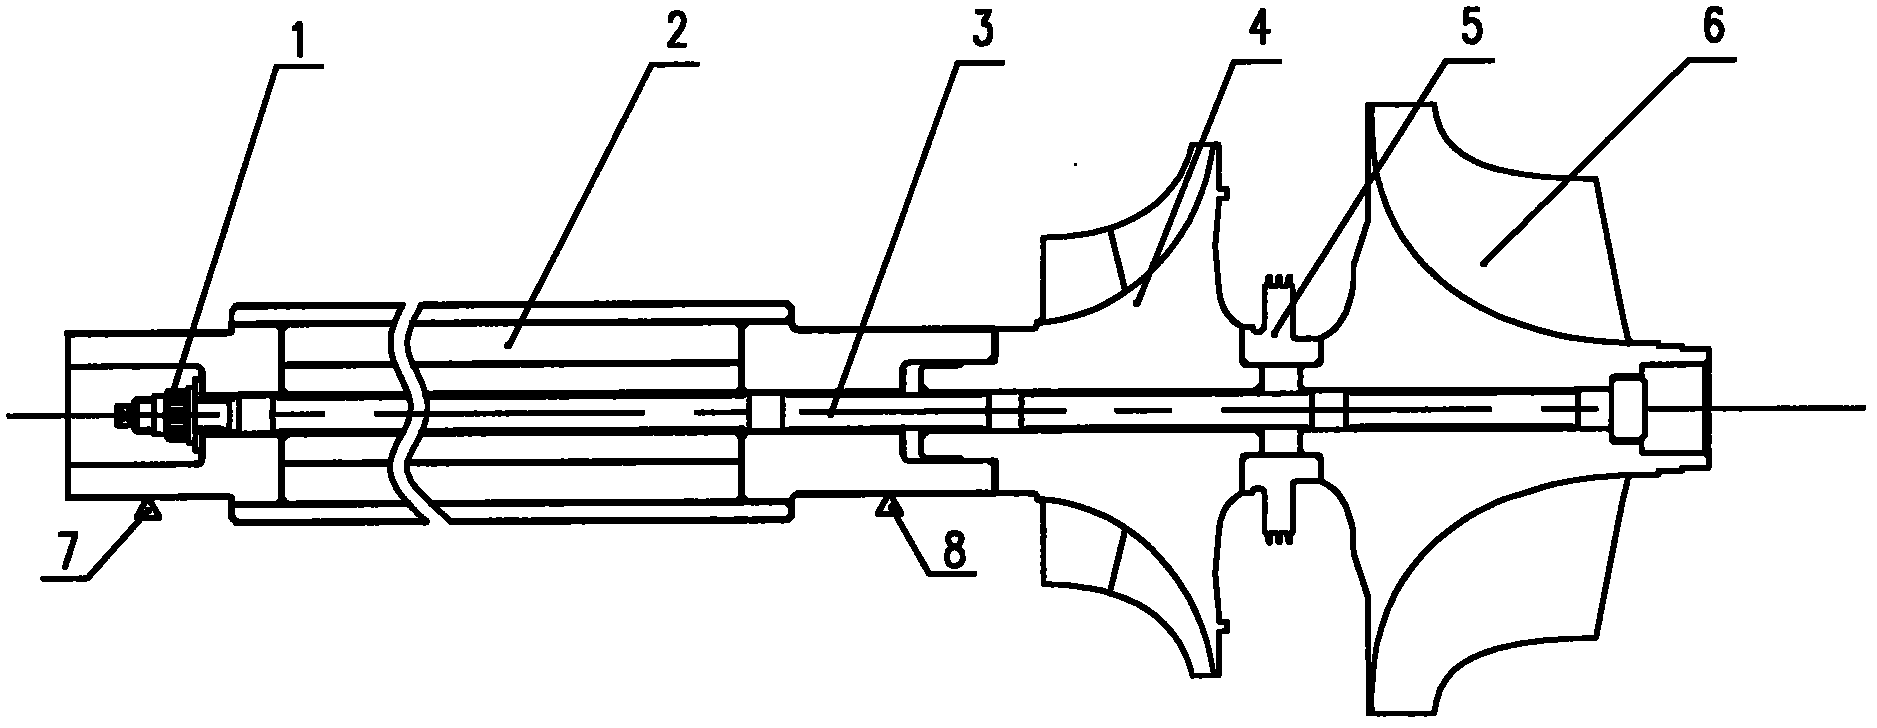 Integrated cantilever rotor structure